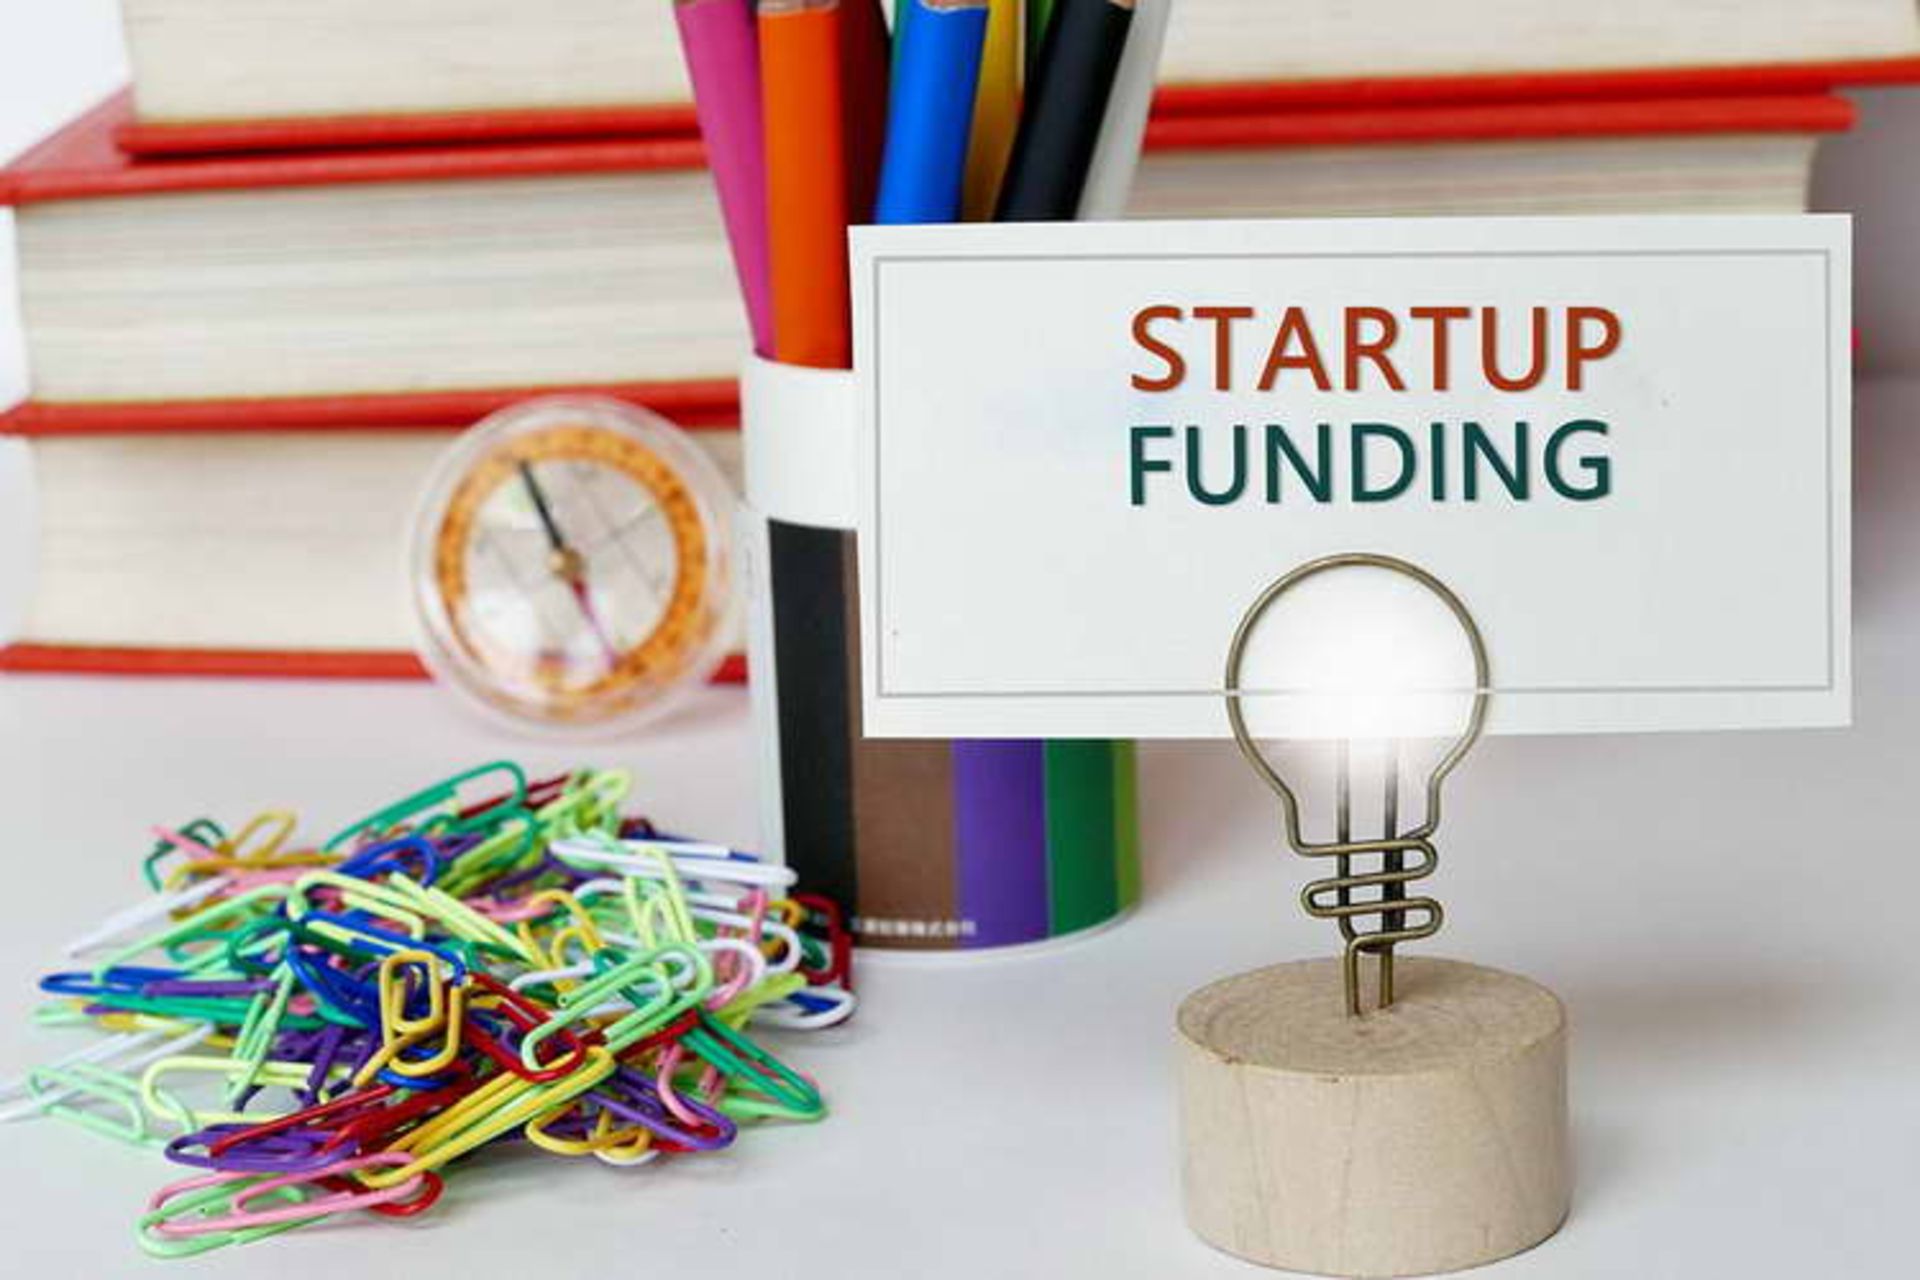 Fundraising - Raise Money for Your Startup